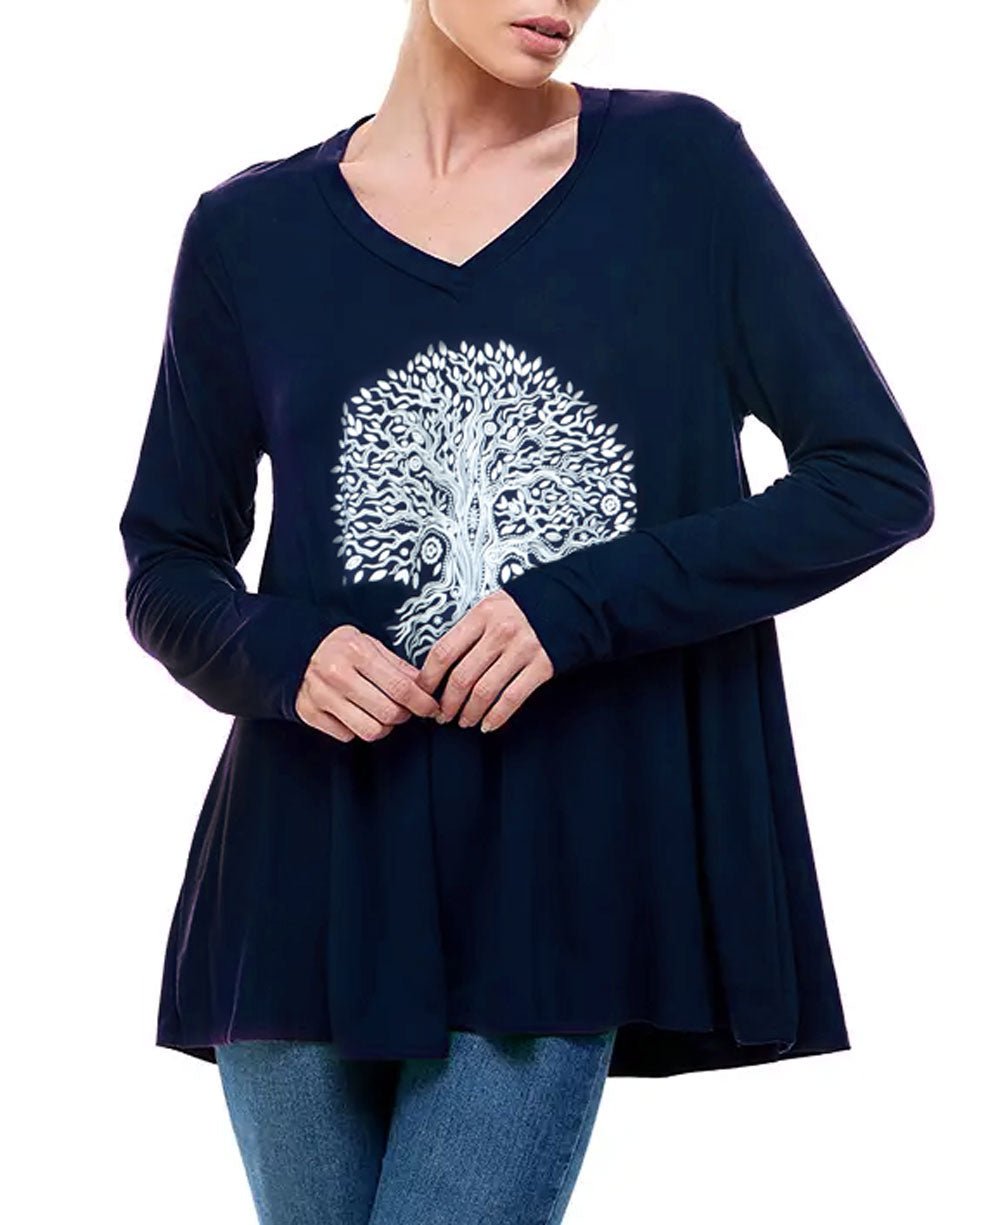 Flowy Navy Blue Tunic Top with Artistic Tree of Life Design - Shirts & Tops S